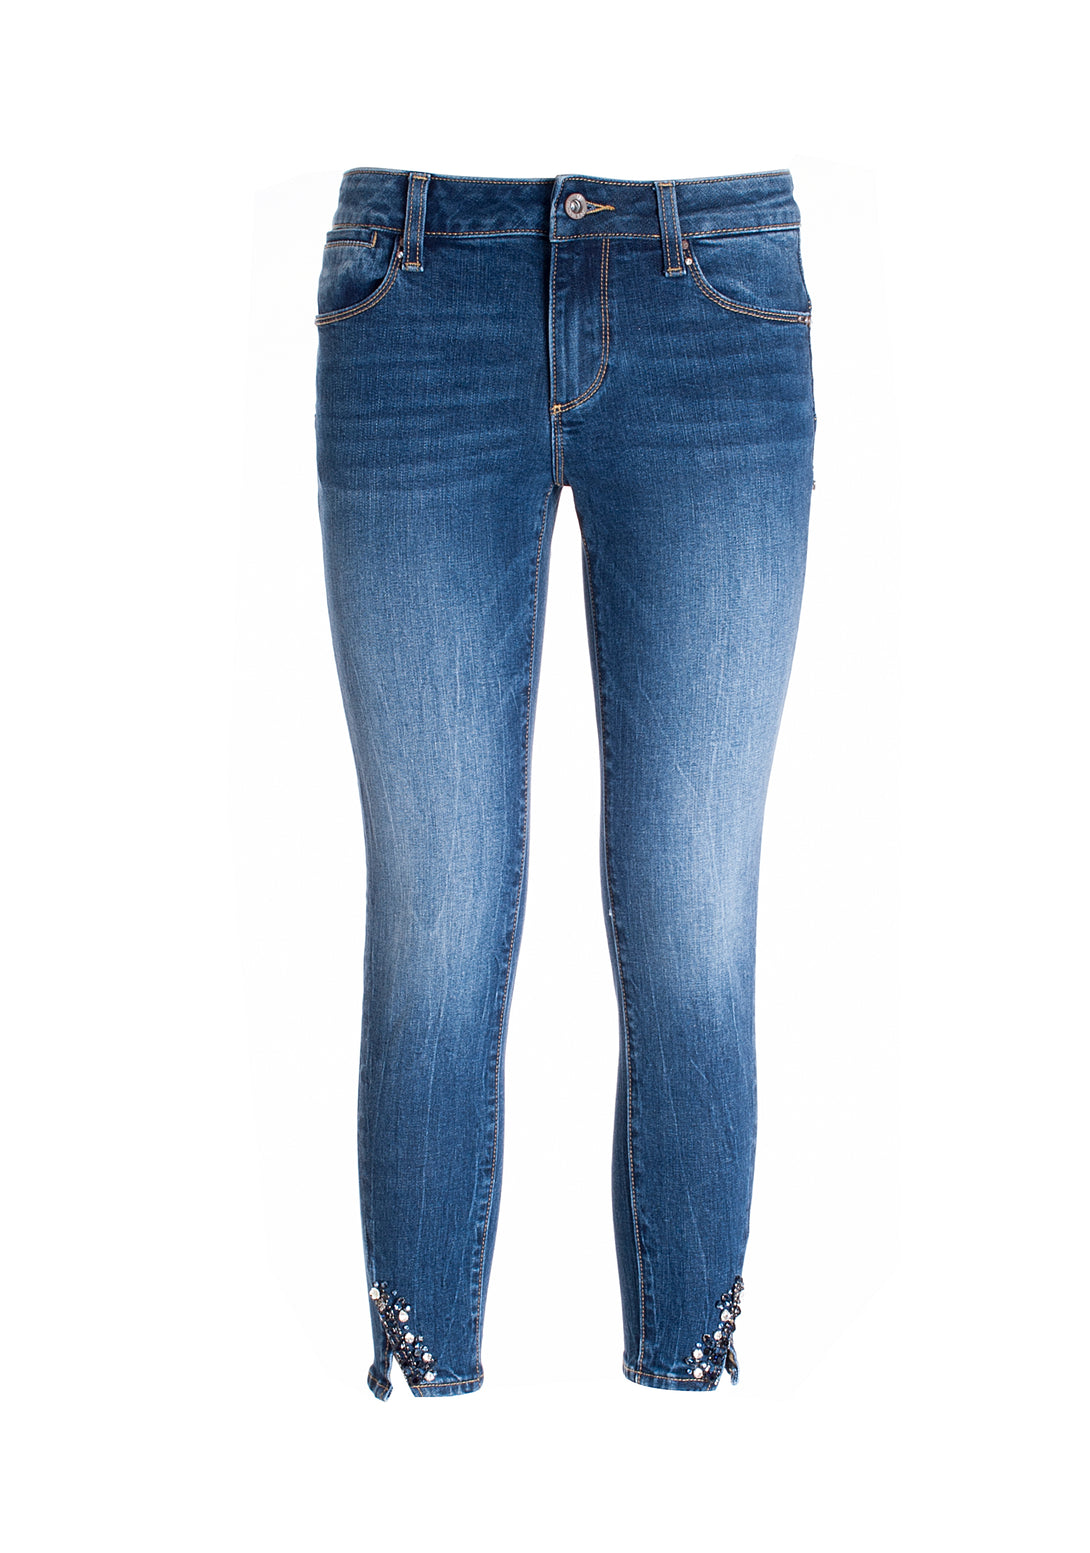 Jeans cropped with push-up effect made in denim with middle wash